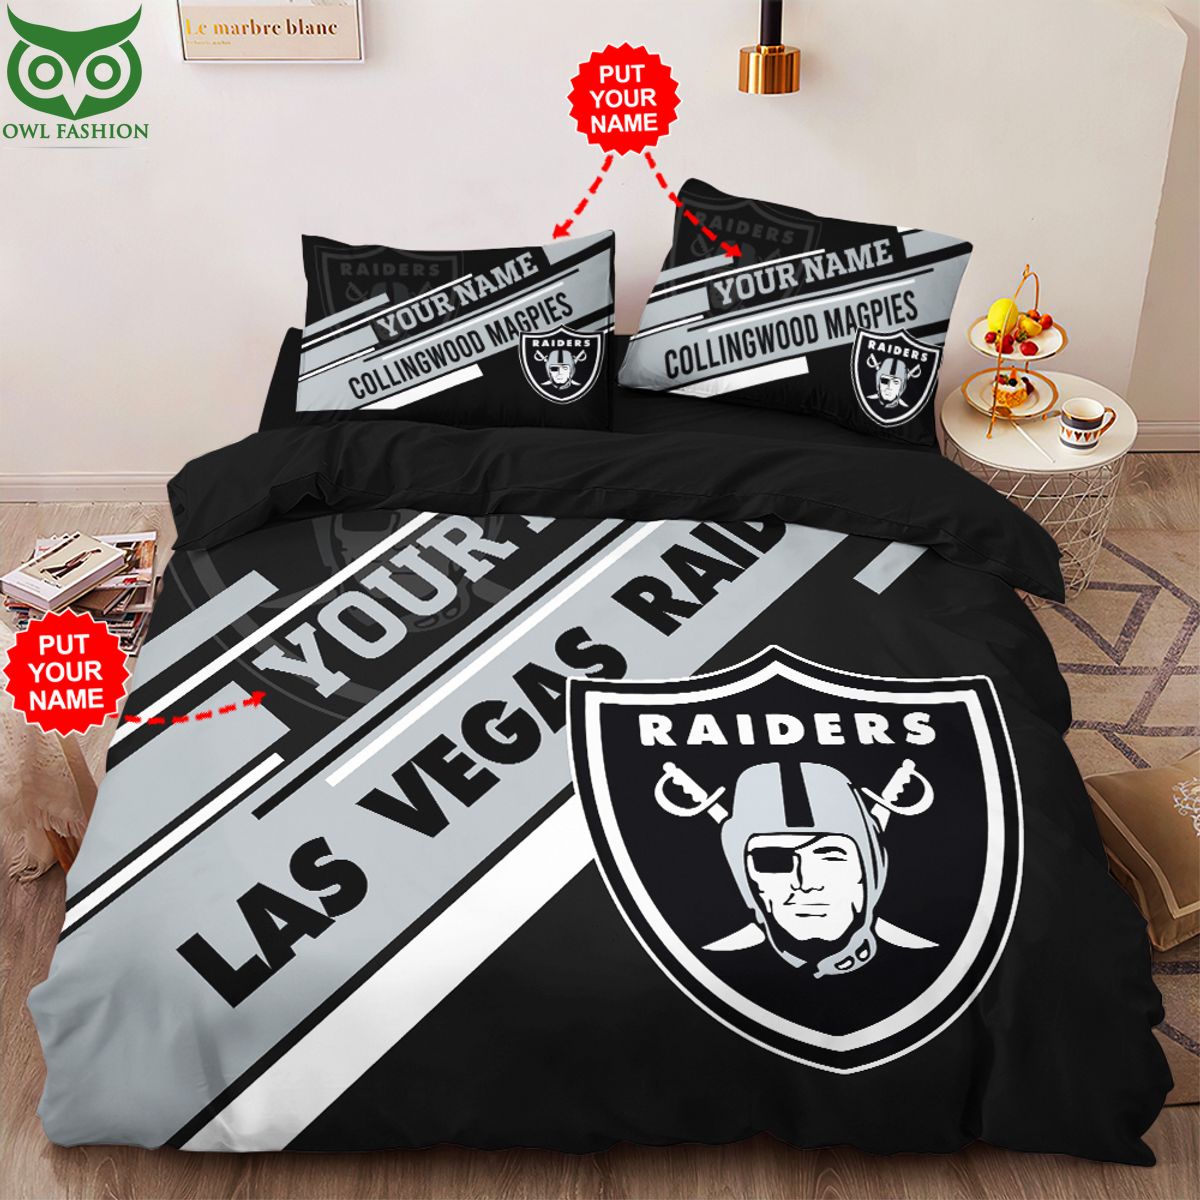 Personalized Las Vegas Raiders NFL Bedding set Such a charming picture.